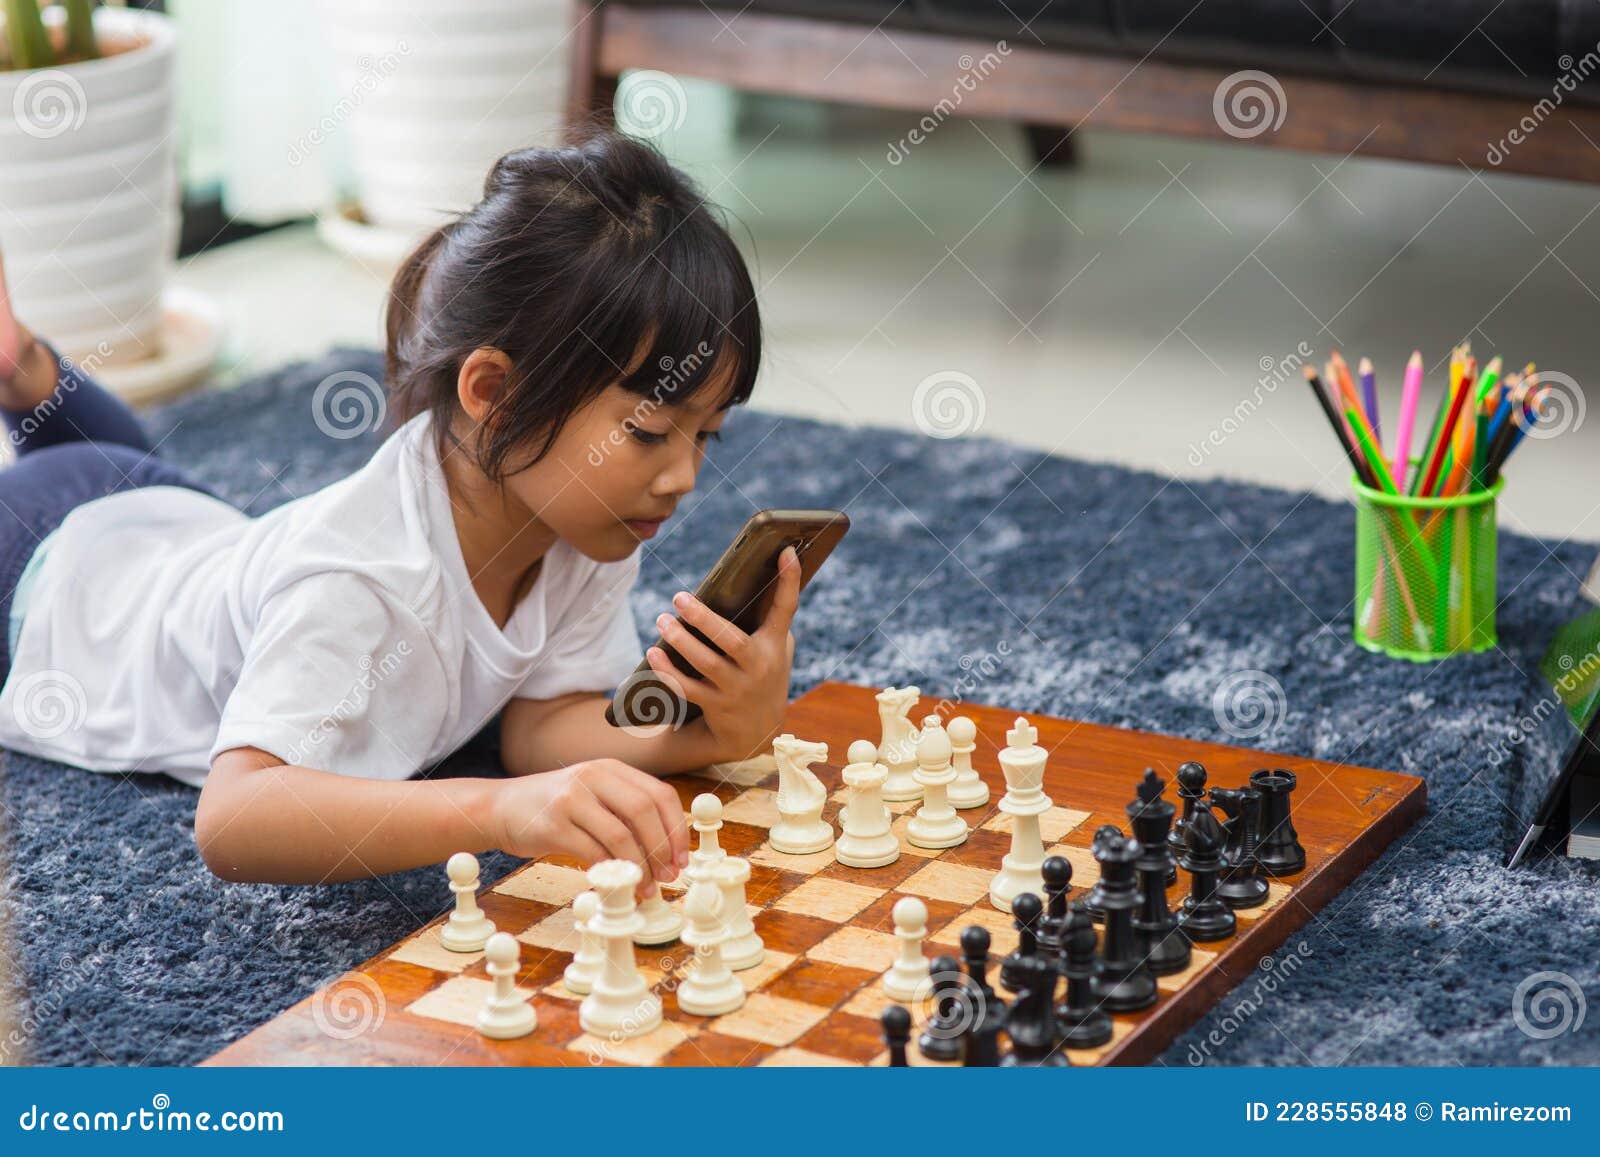 Chess Lessons - Learn with Online Courses 